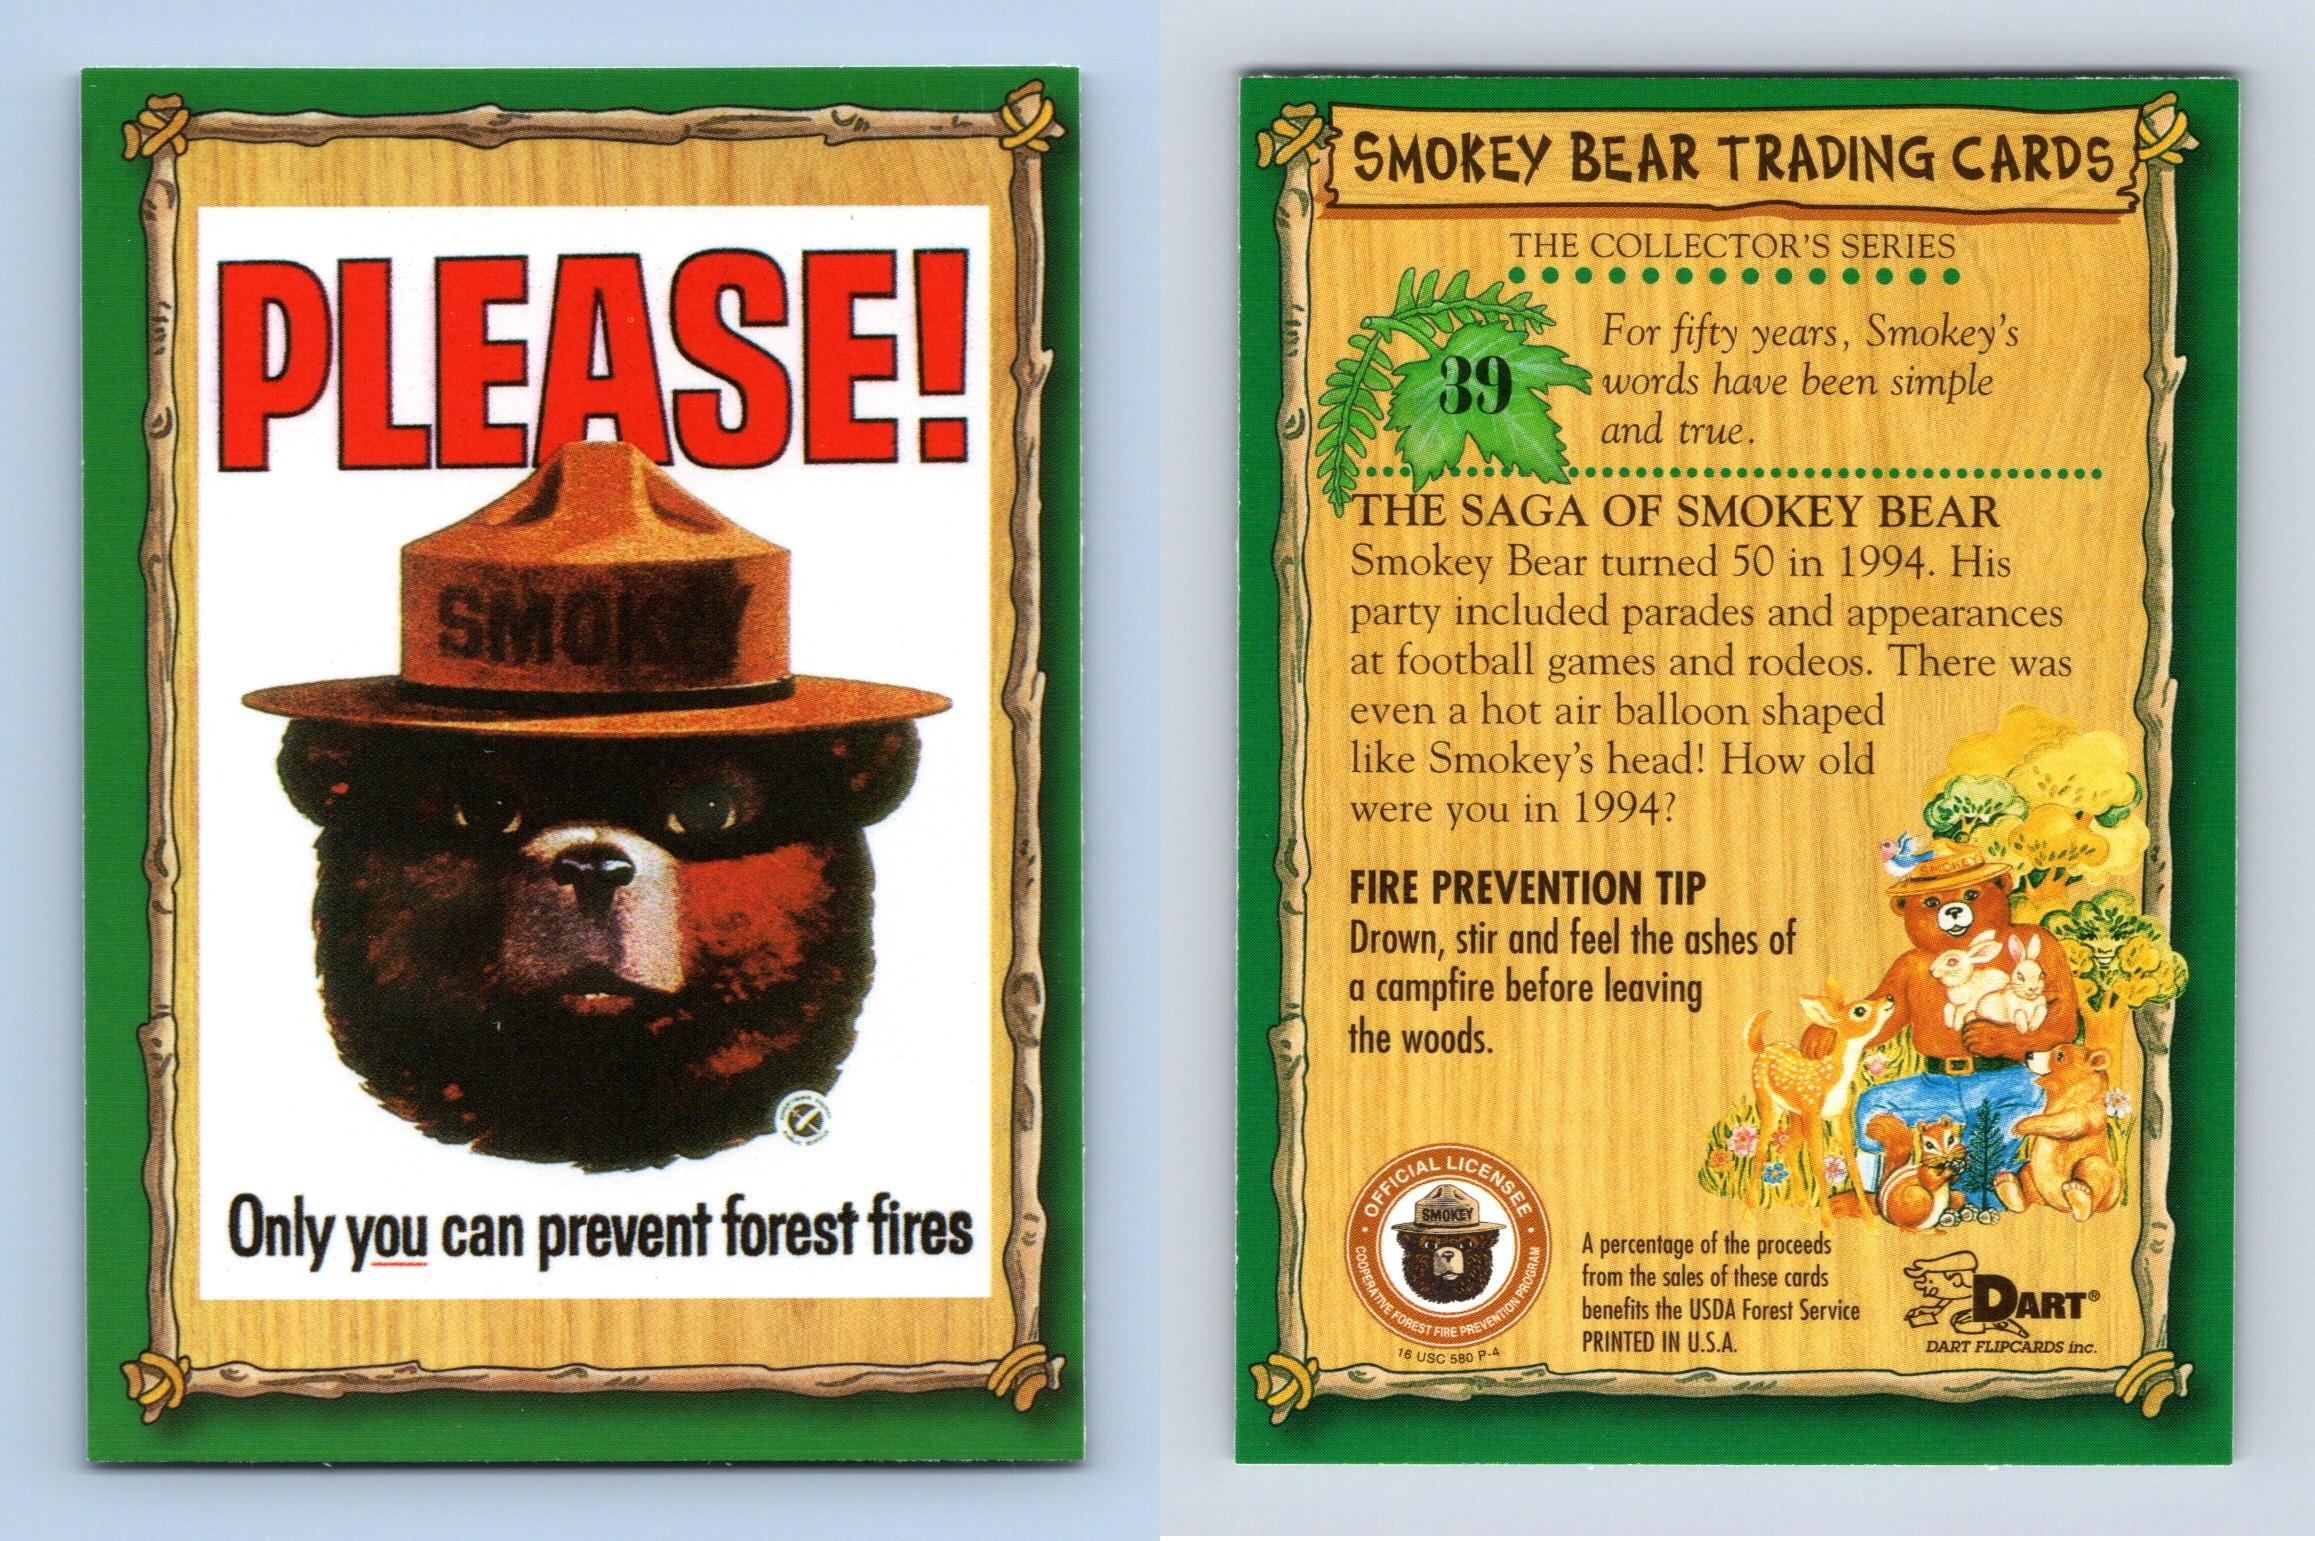 C2629 Only You Can Prevent Forest Fires #39 Smokey Bear 1996 Dart Trading Card 